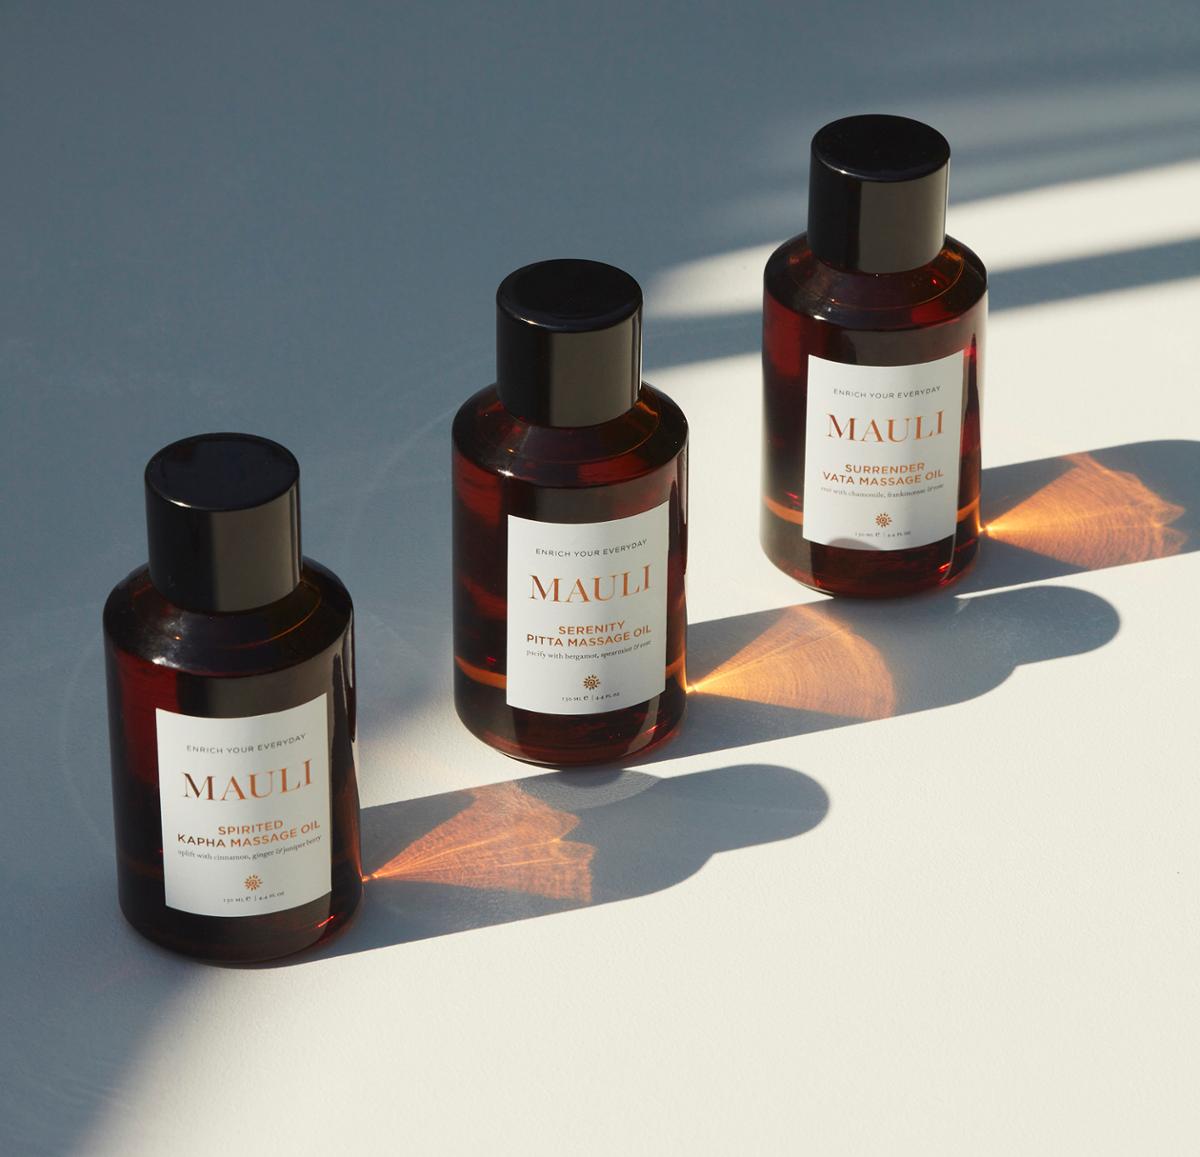 Mauli Rituals integrates ancient India’s beauty tradition of layering, anointing and purifying with sensual oils, healing herbs and fragrant flowers / Mauli Rituals